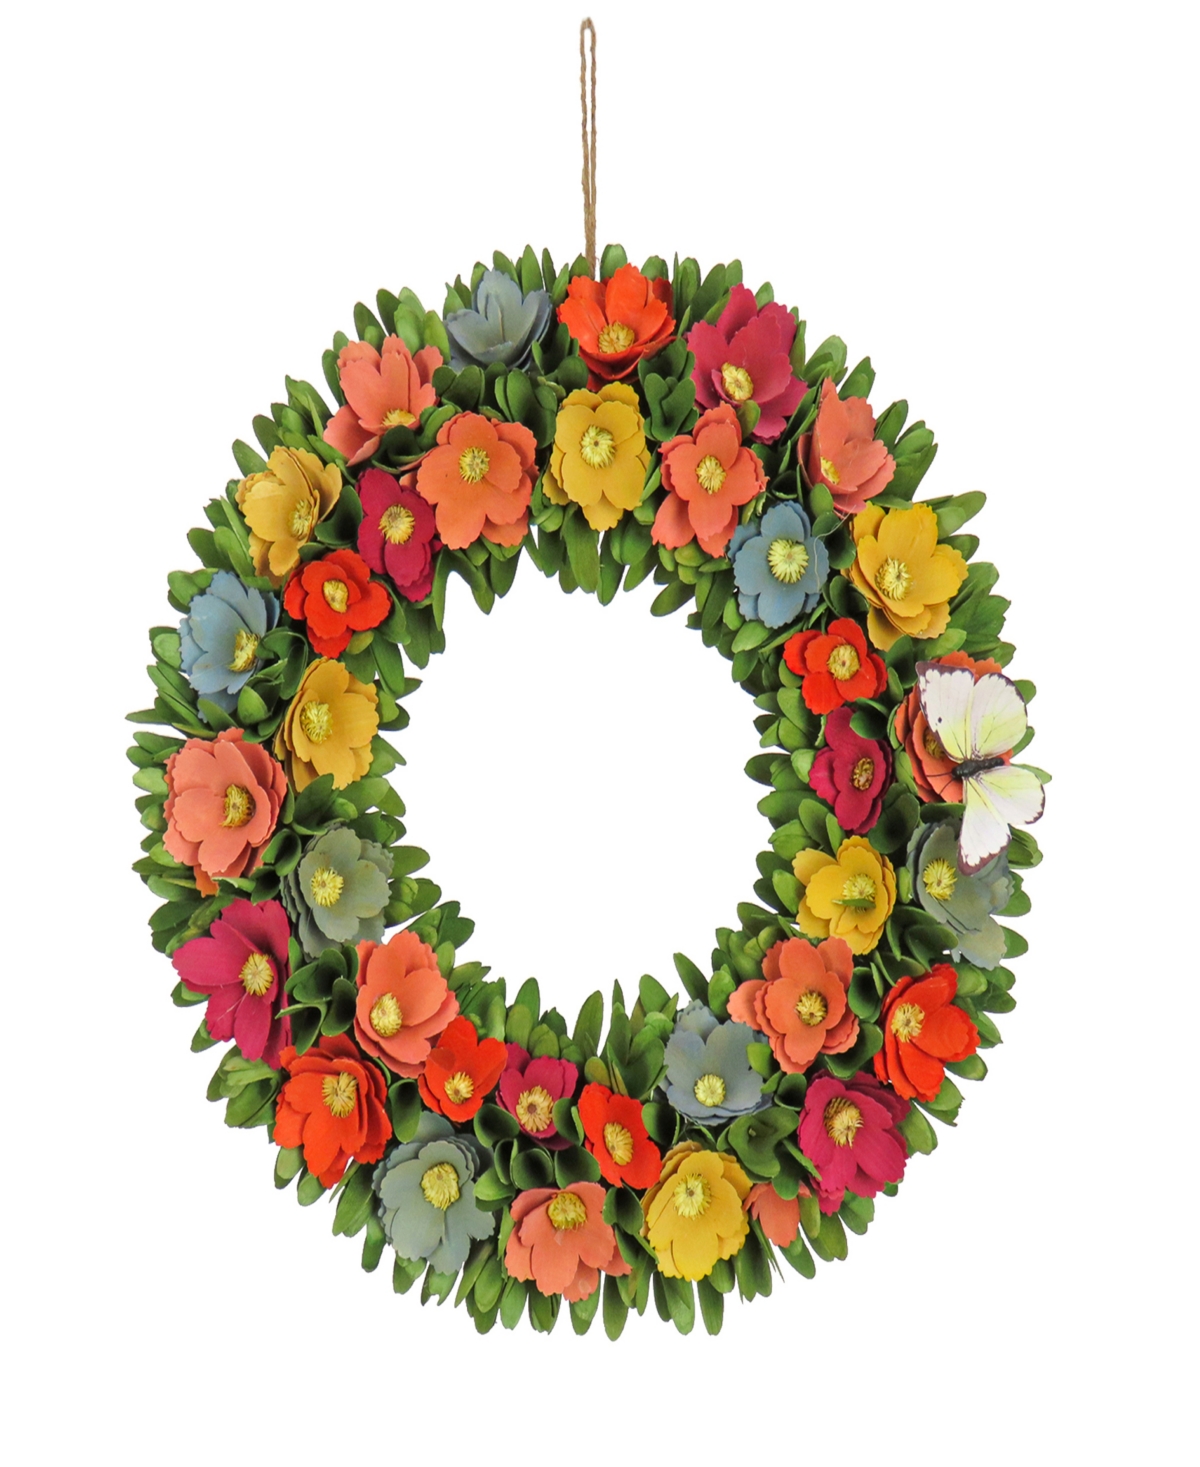 20 Spring Floral Wreath with Butterfly - Multi